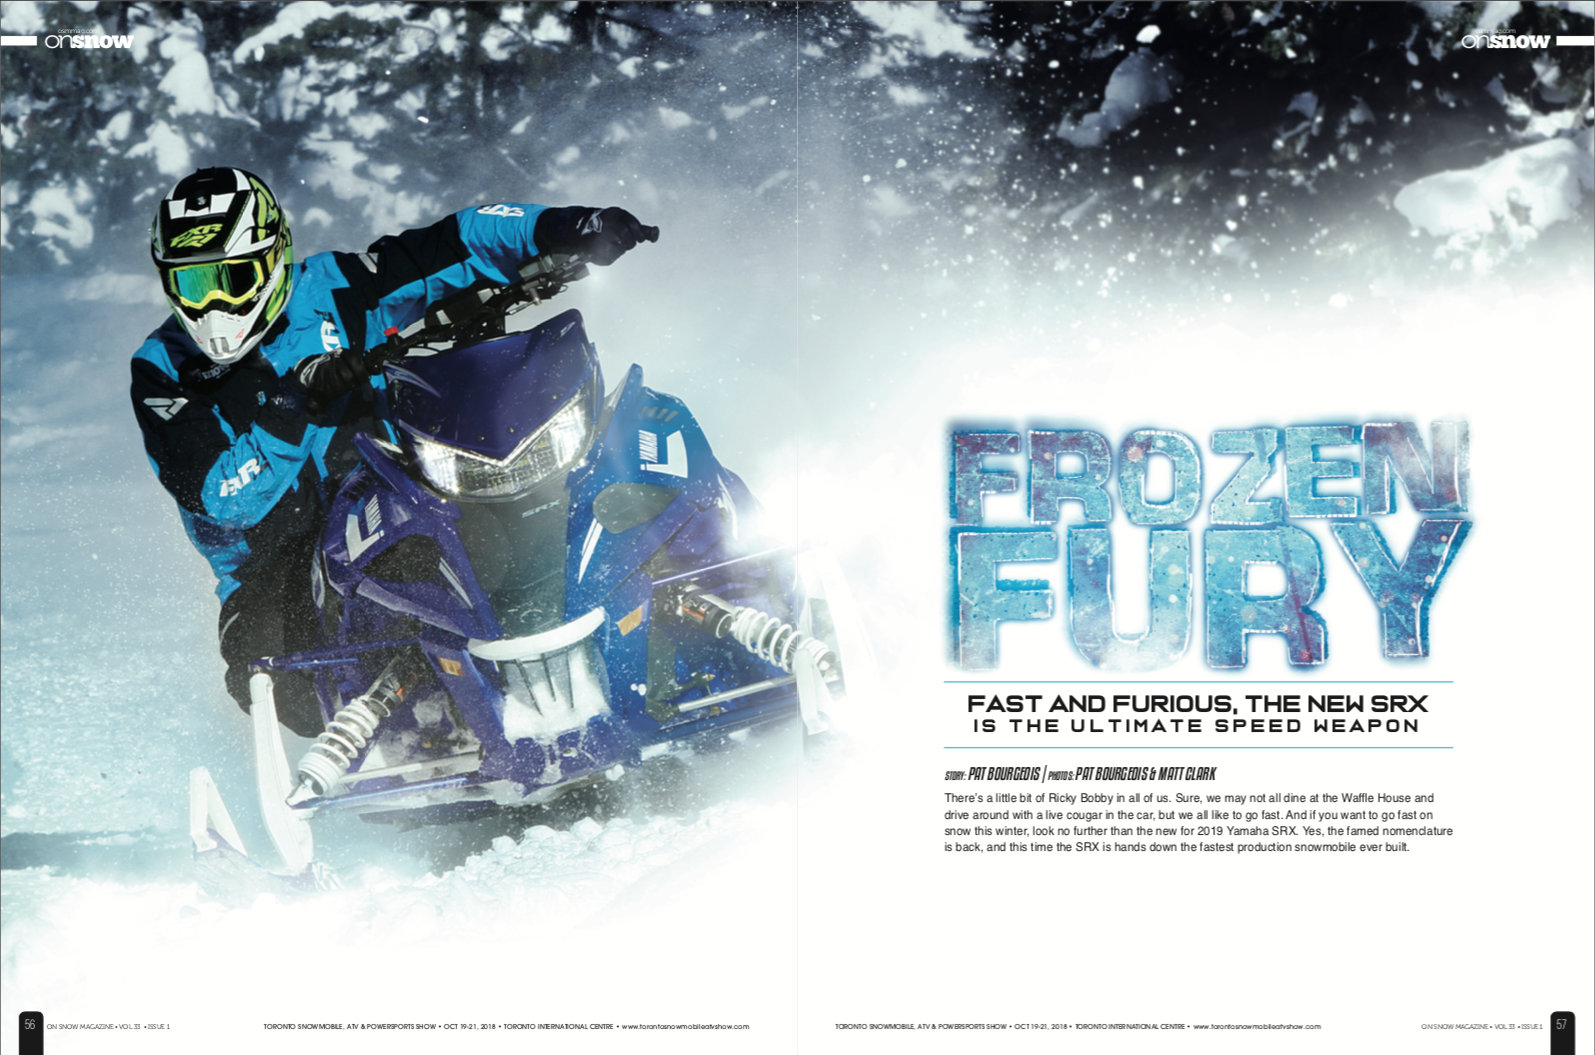 On Snow Magazine Osm Frozen Fury Fast And Furious The Srx Is The Ultimate Speed Weapon On Snow Magazine Osm